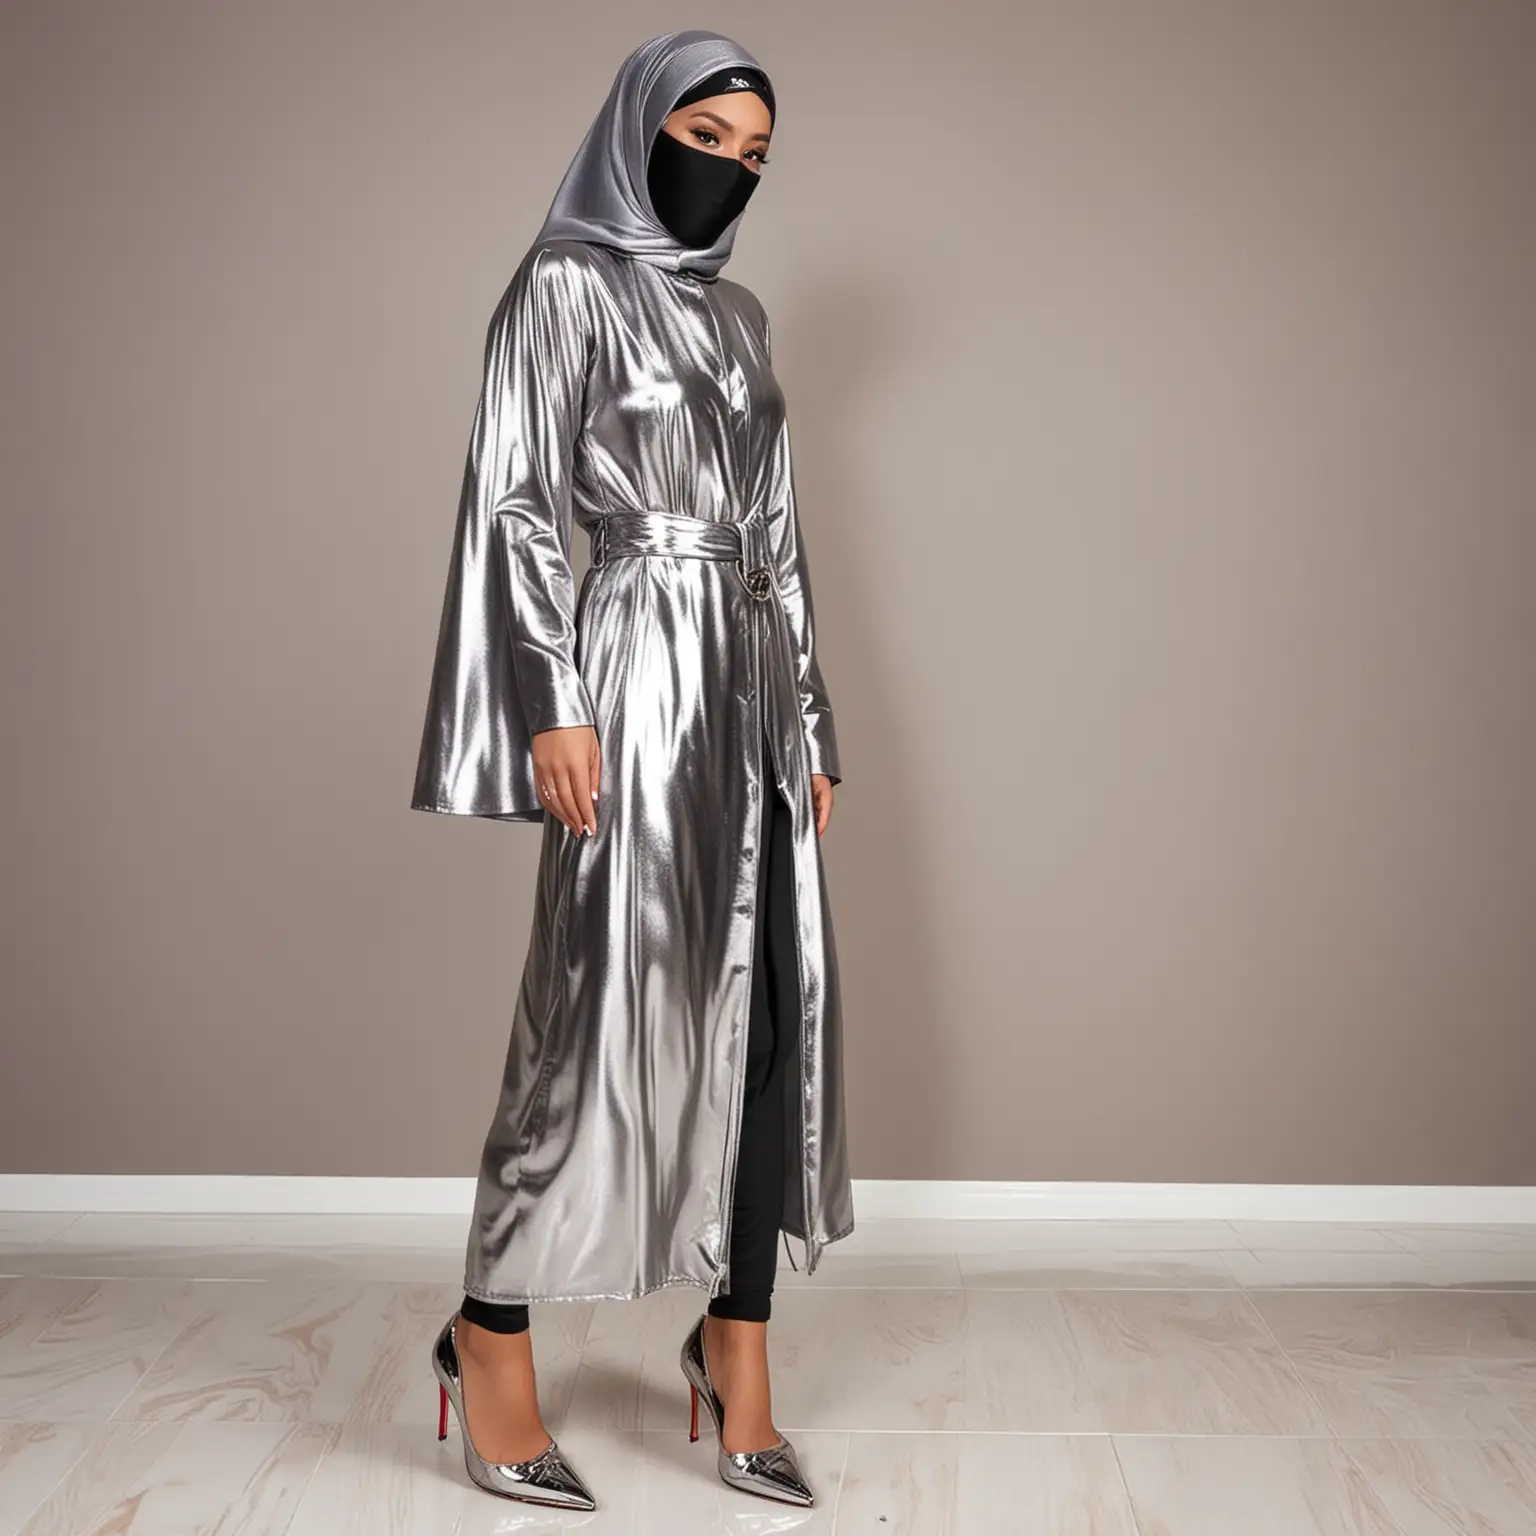 Malay Muslim lady in expensive metallic shiny abaya with a shiny niqab covering her face and Louboutin So-Kate heels